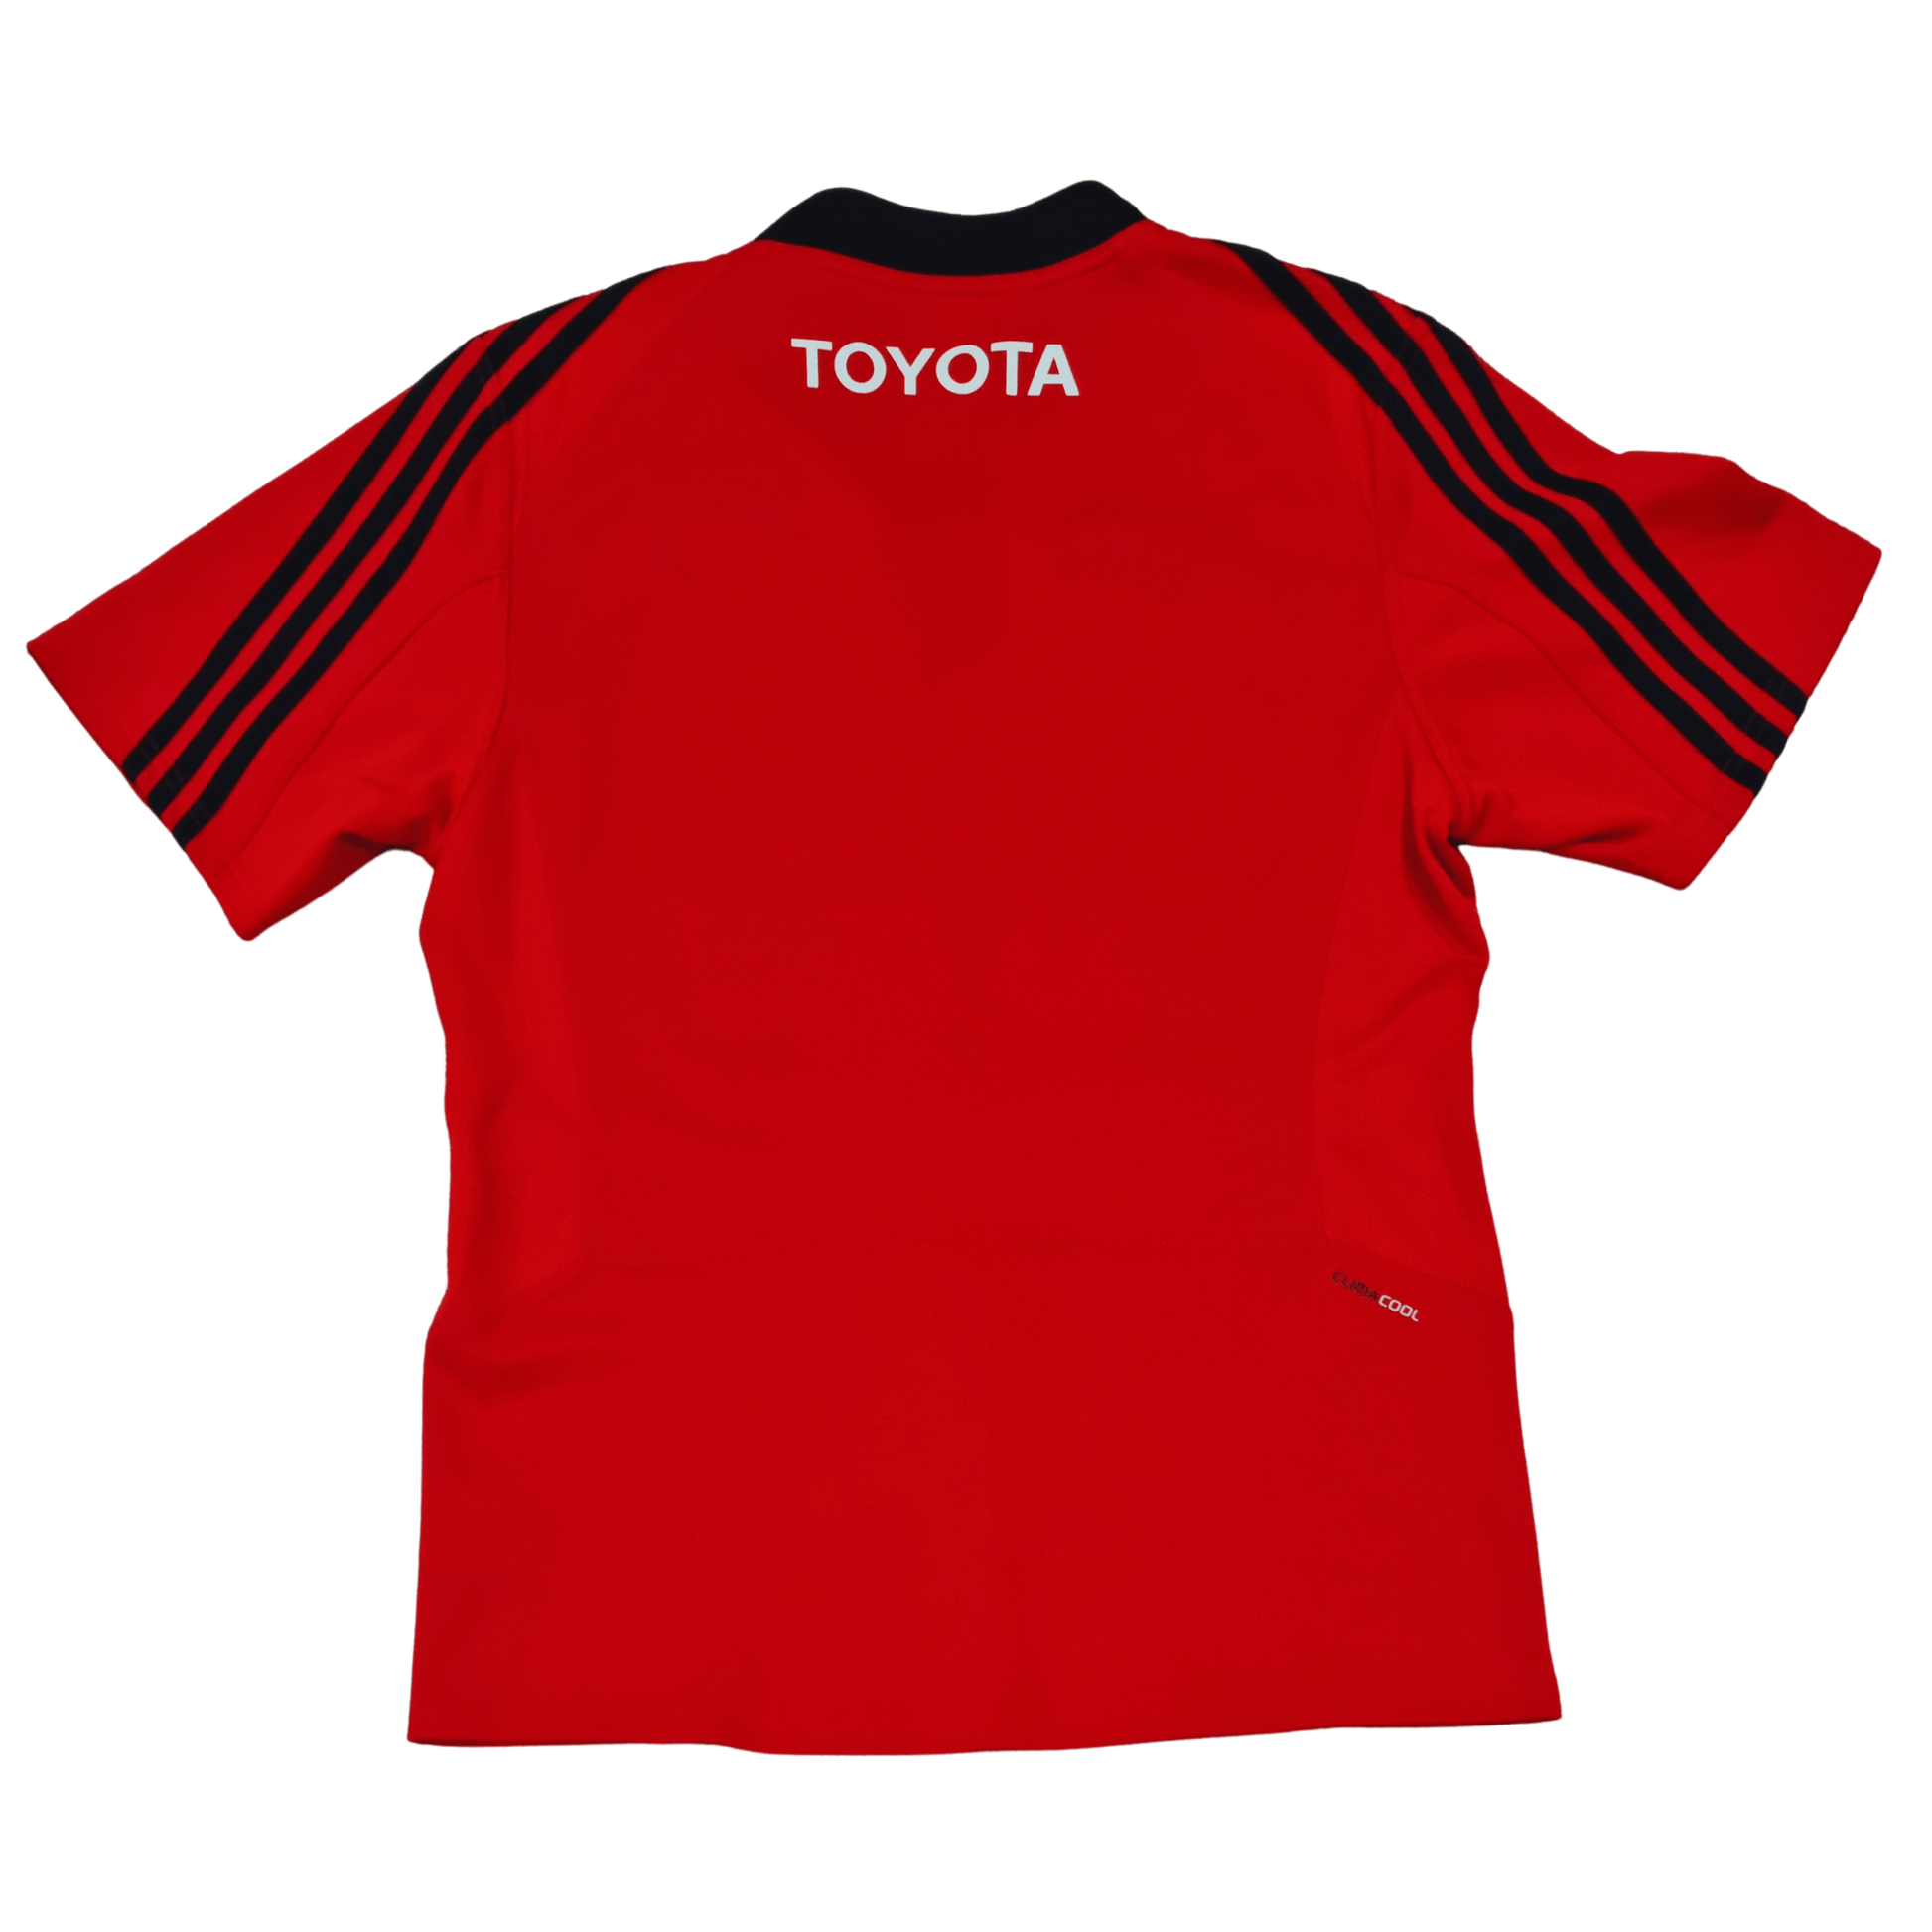 A red Adidas Munster 2011/12 Home Jersey with the word Toyota on it.